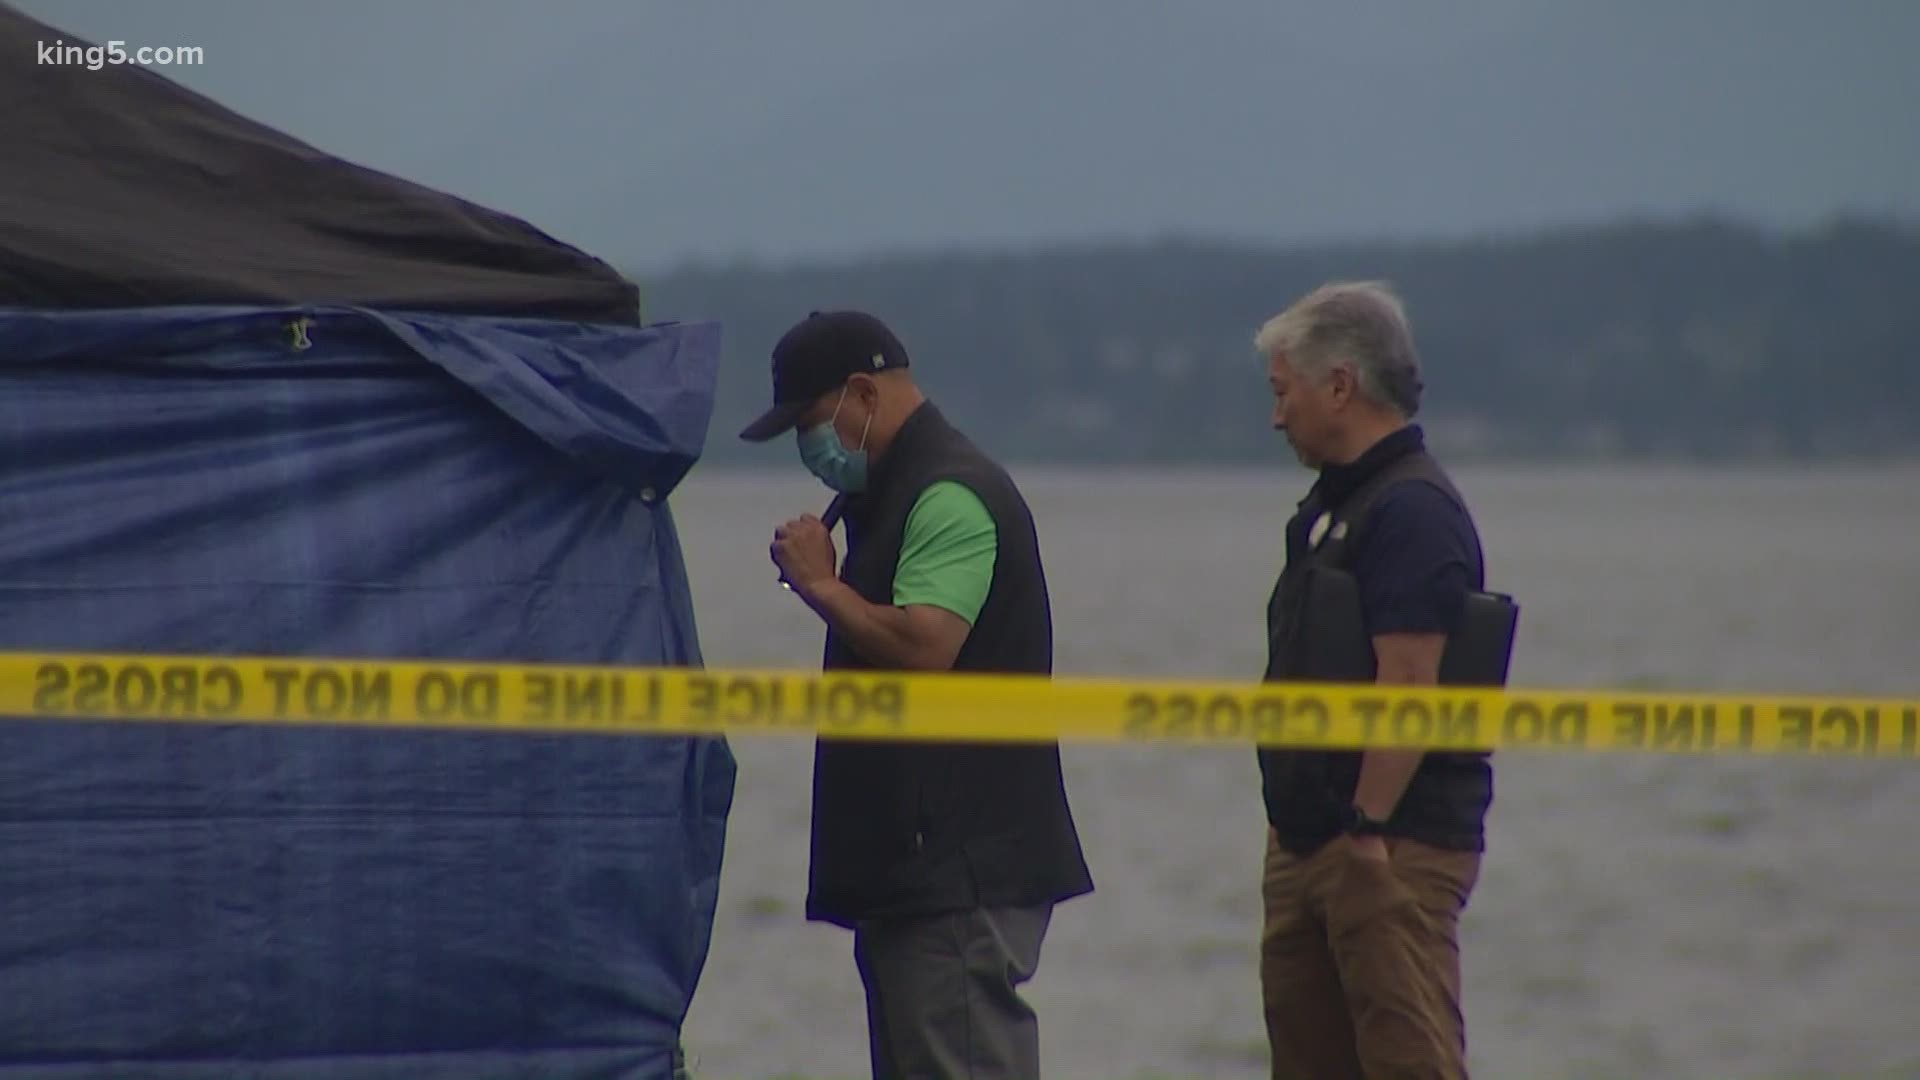 People who live in the area were shocked to hear that "several bags" of human remains were found near Luna Park in West Seattle. Police are investigating.